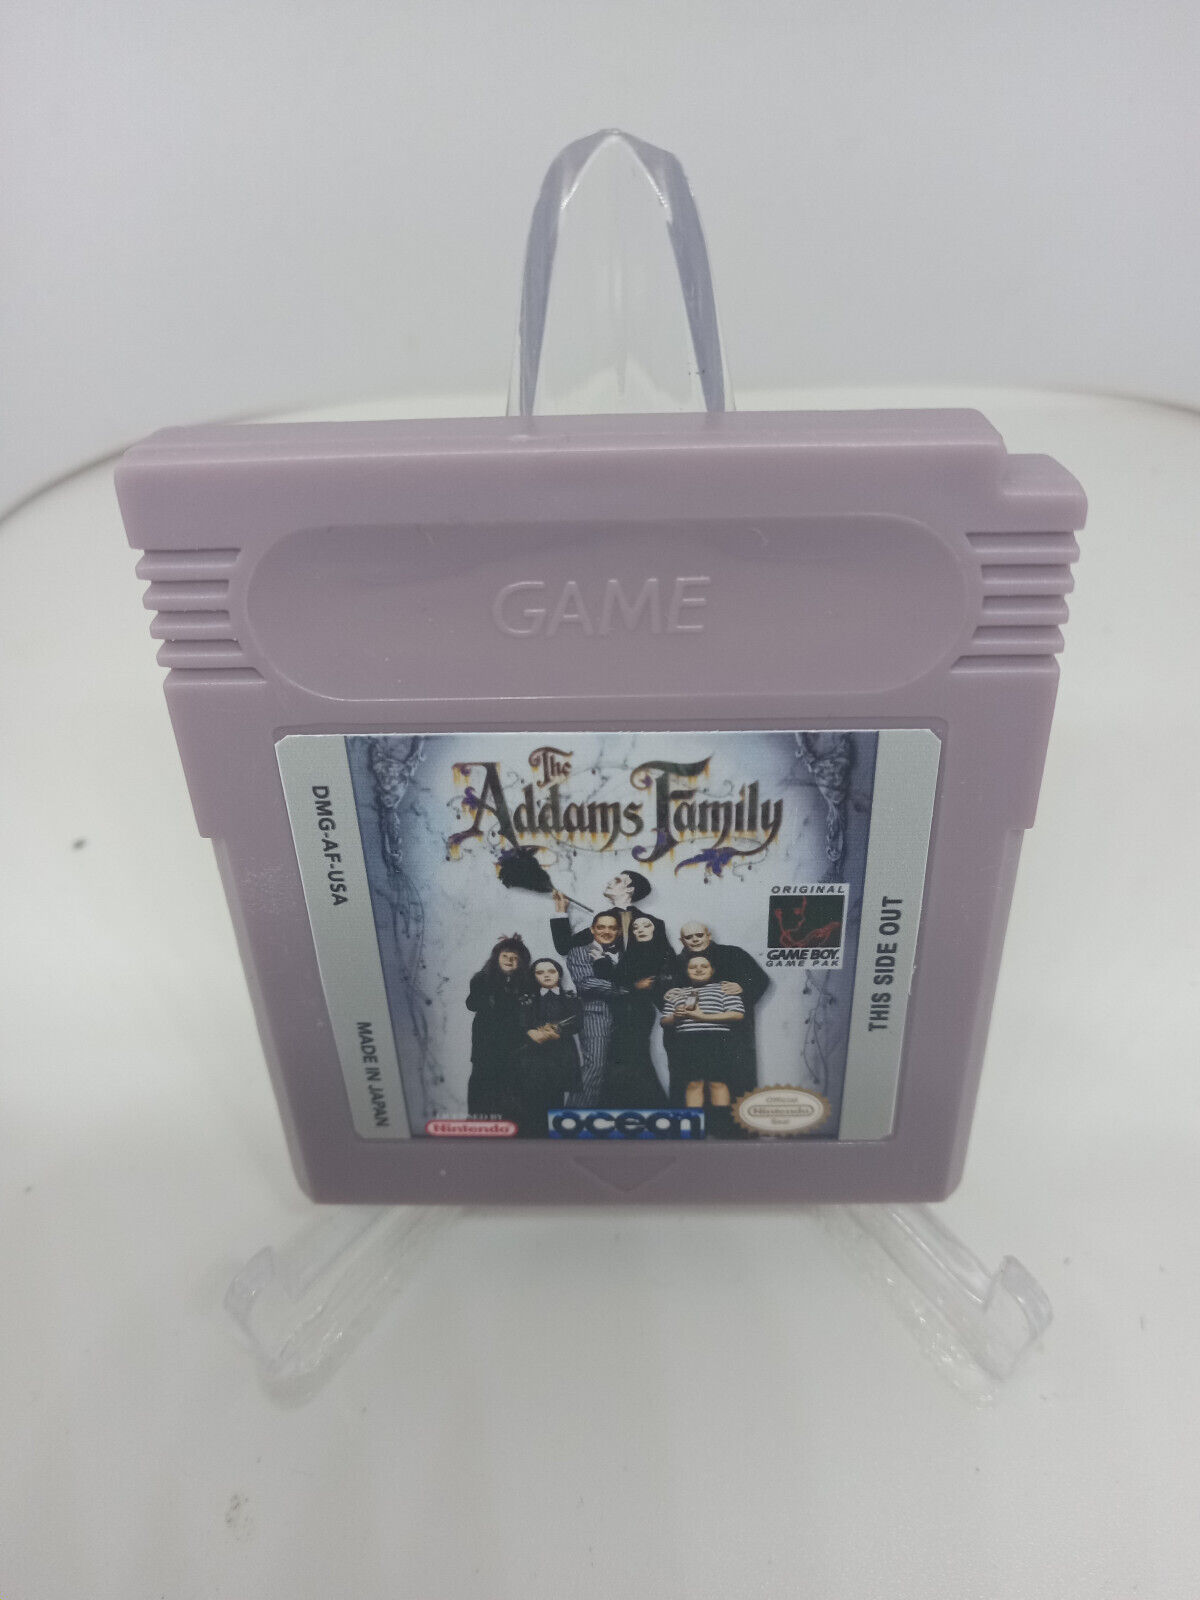 Addams Family (Nintendo Game Boy, 1991) Reconditioned! Authentic!